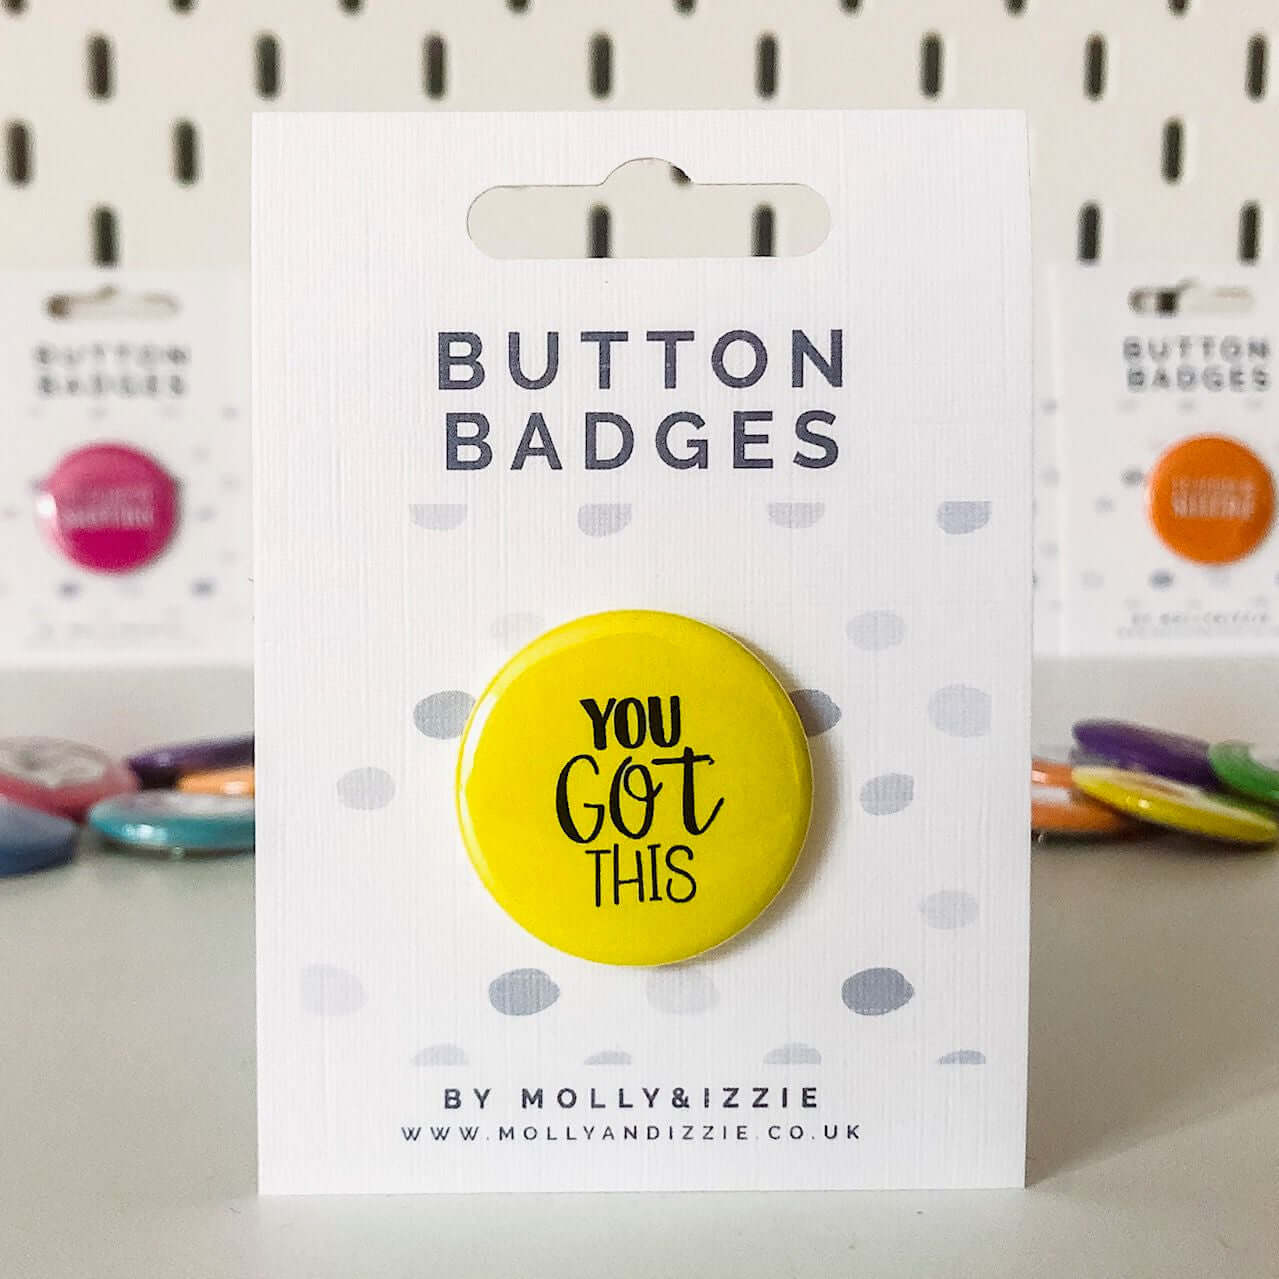 by Molly & Izzie You Got This Button Badge Button Badge By Molly & Izzie